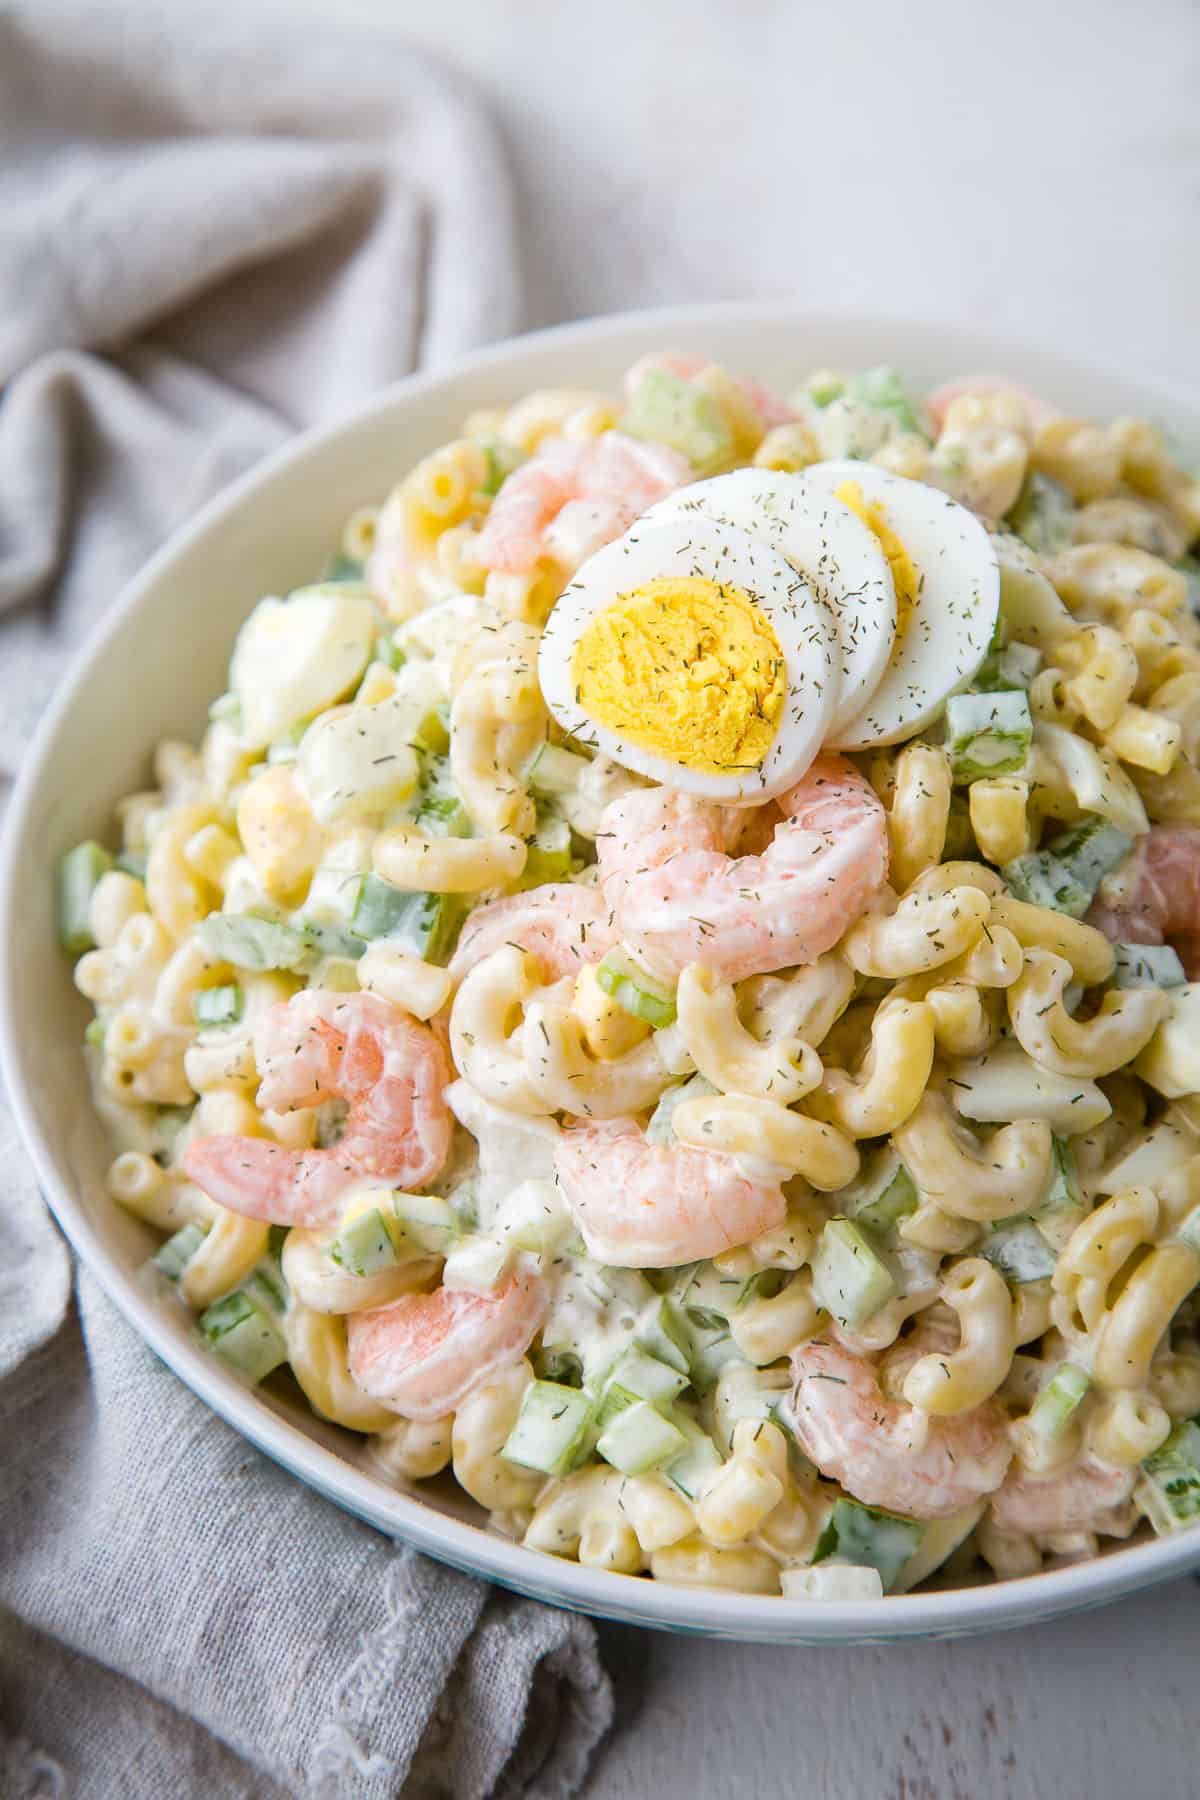 macaroni salad with shrimp in a white bowl, topped with hard boiled egg slices.